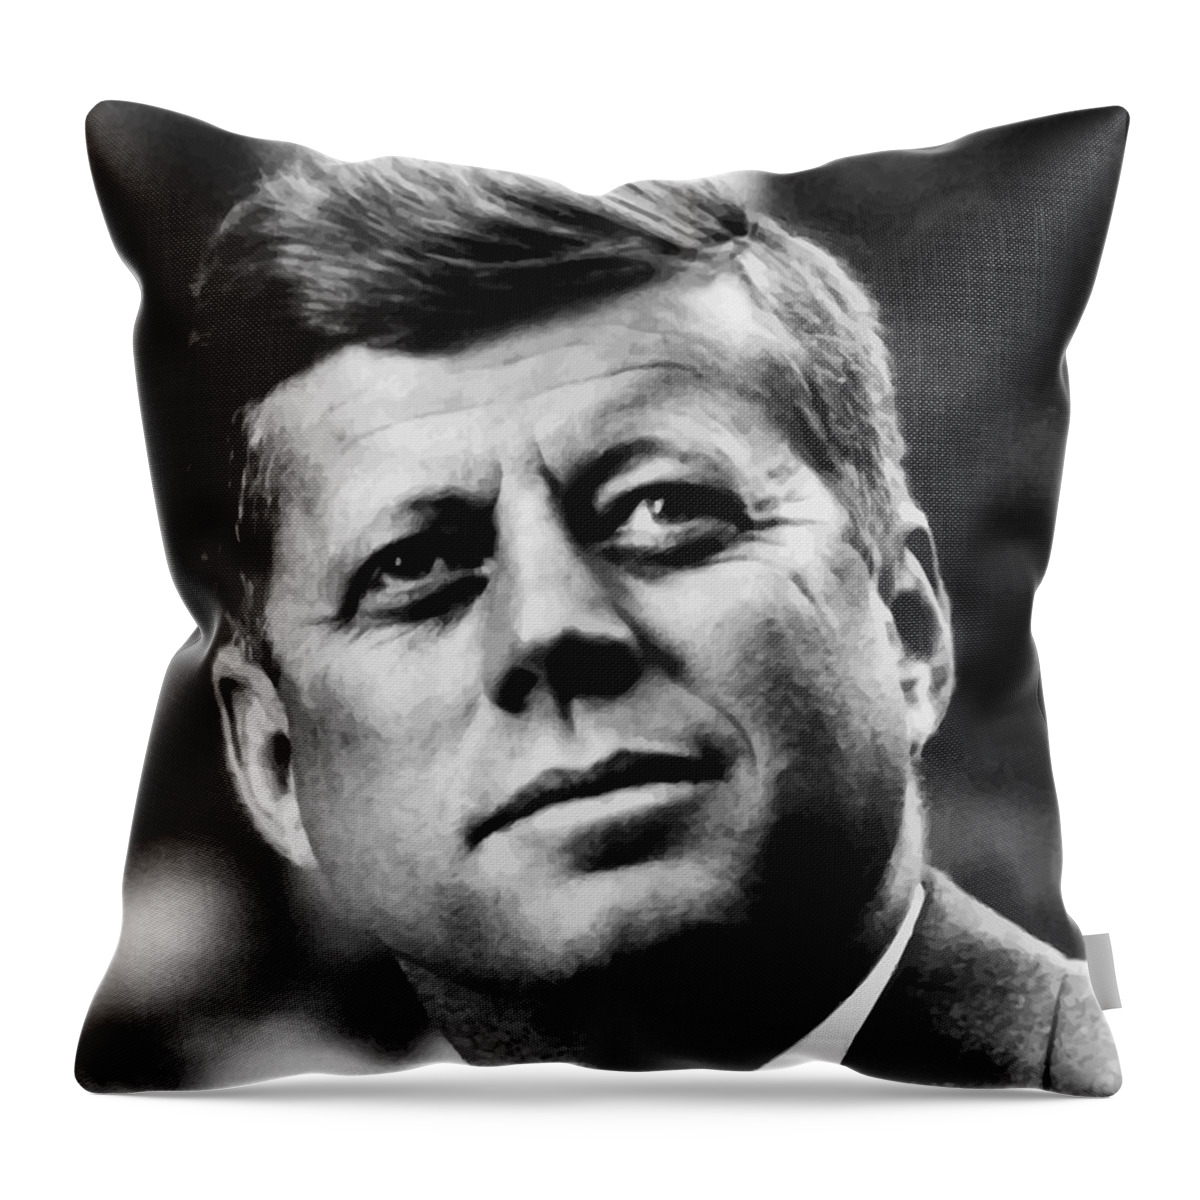 Jfk Throw Pillow featuring the painting President Kennedy by War Is Hell Store